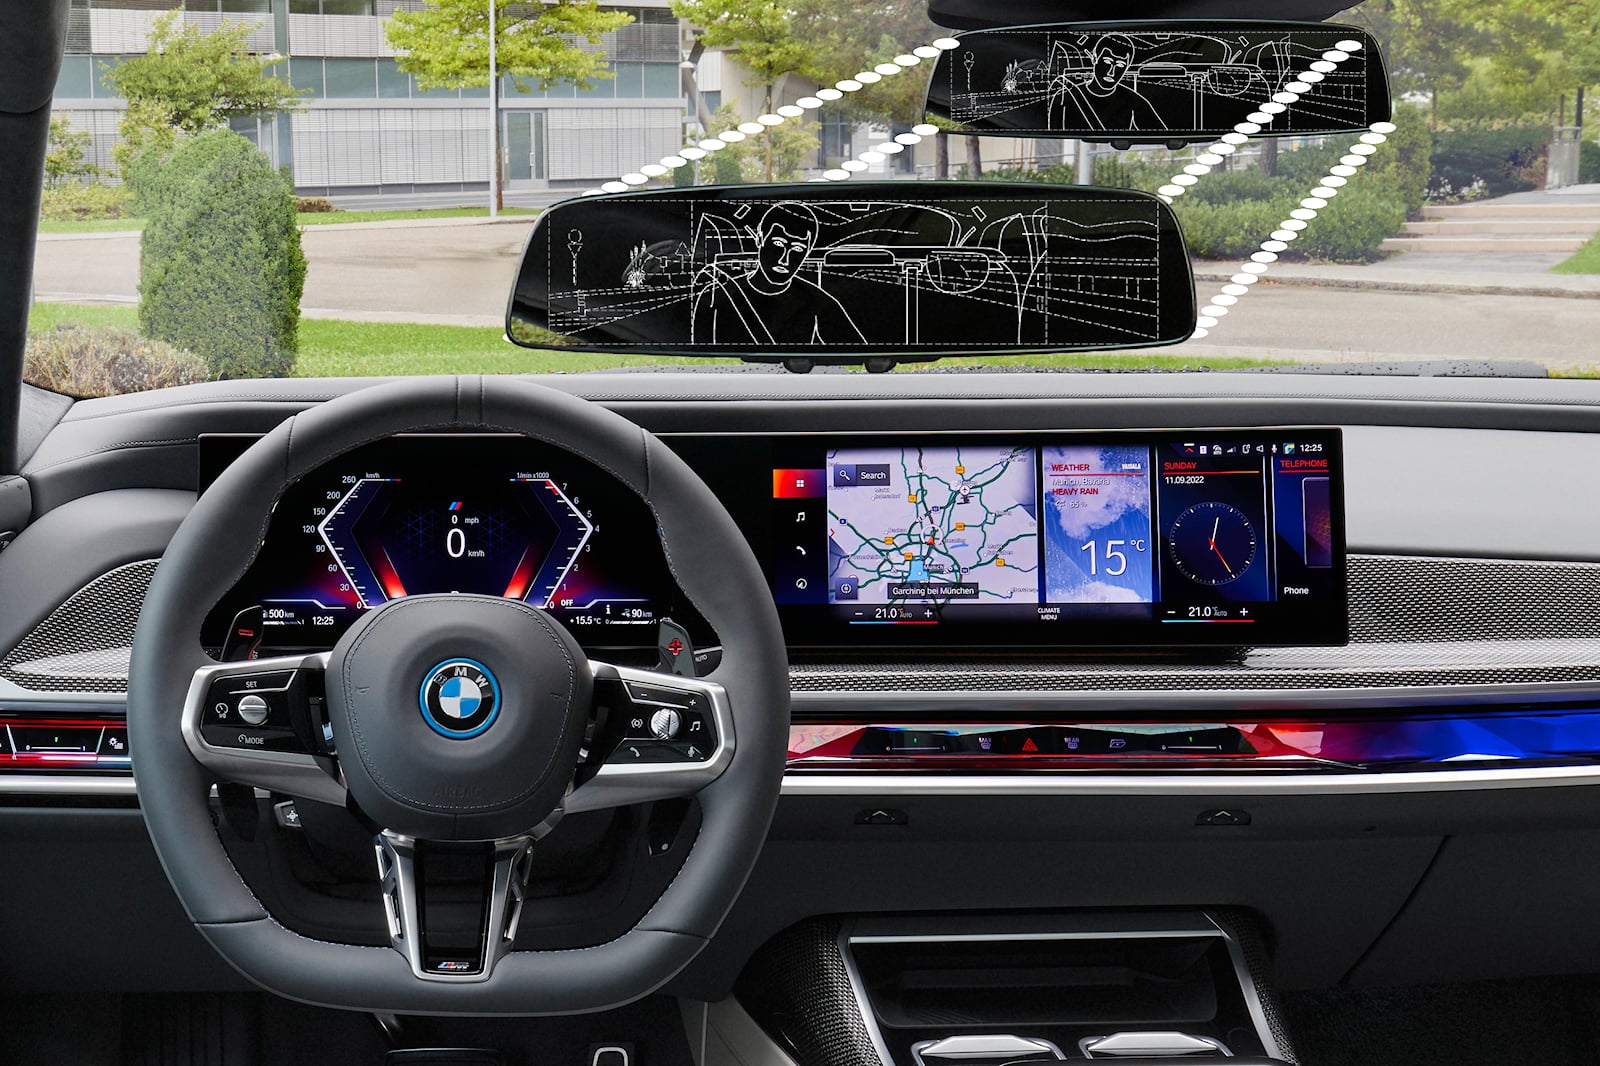 New BMW Digital Rearview Mirror Only Shows You The Most Important